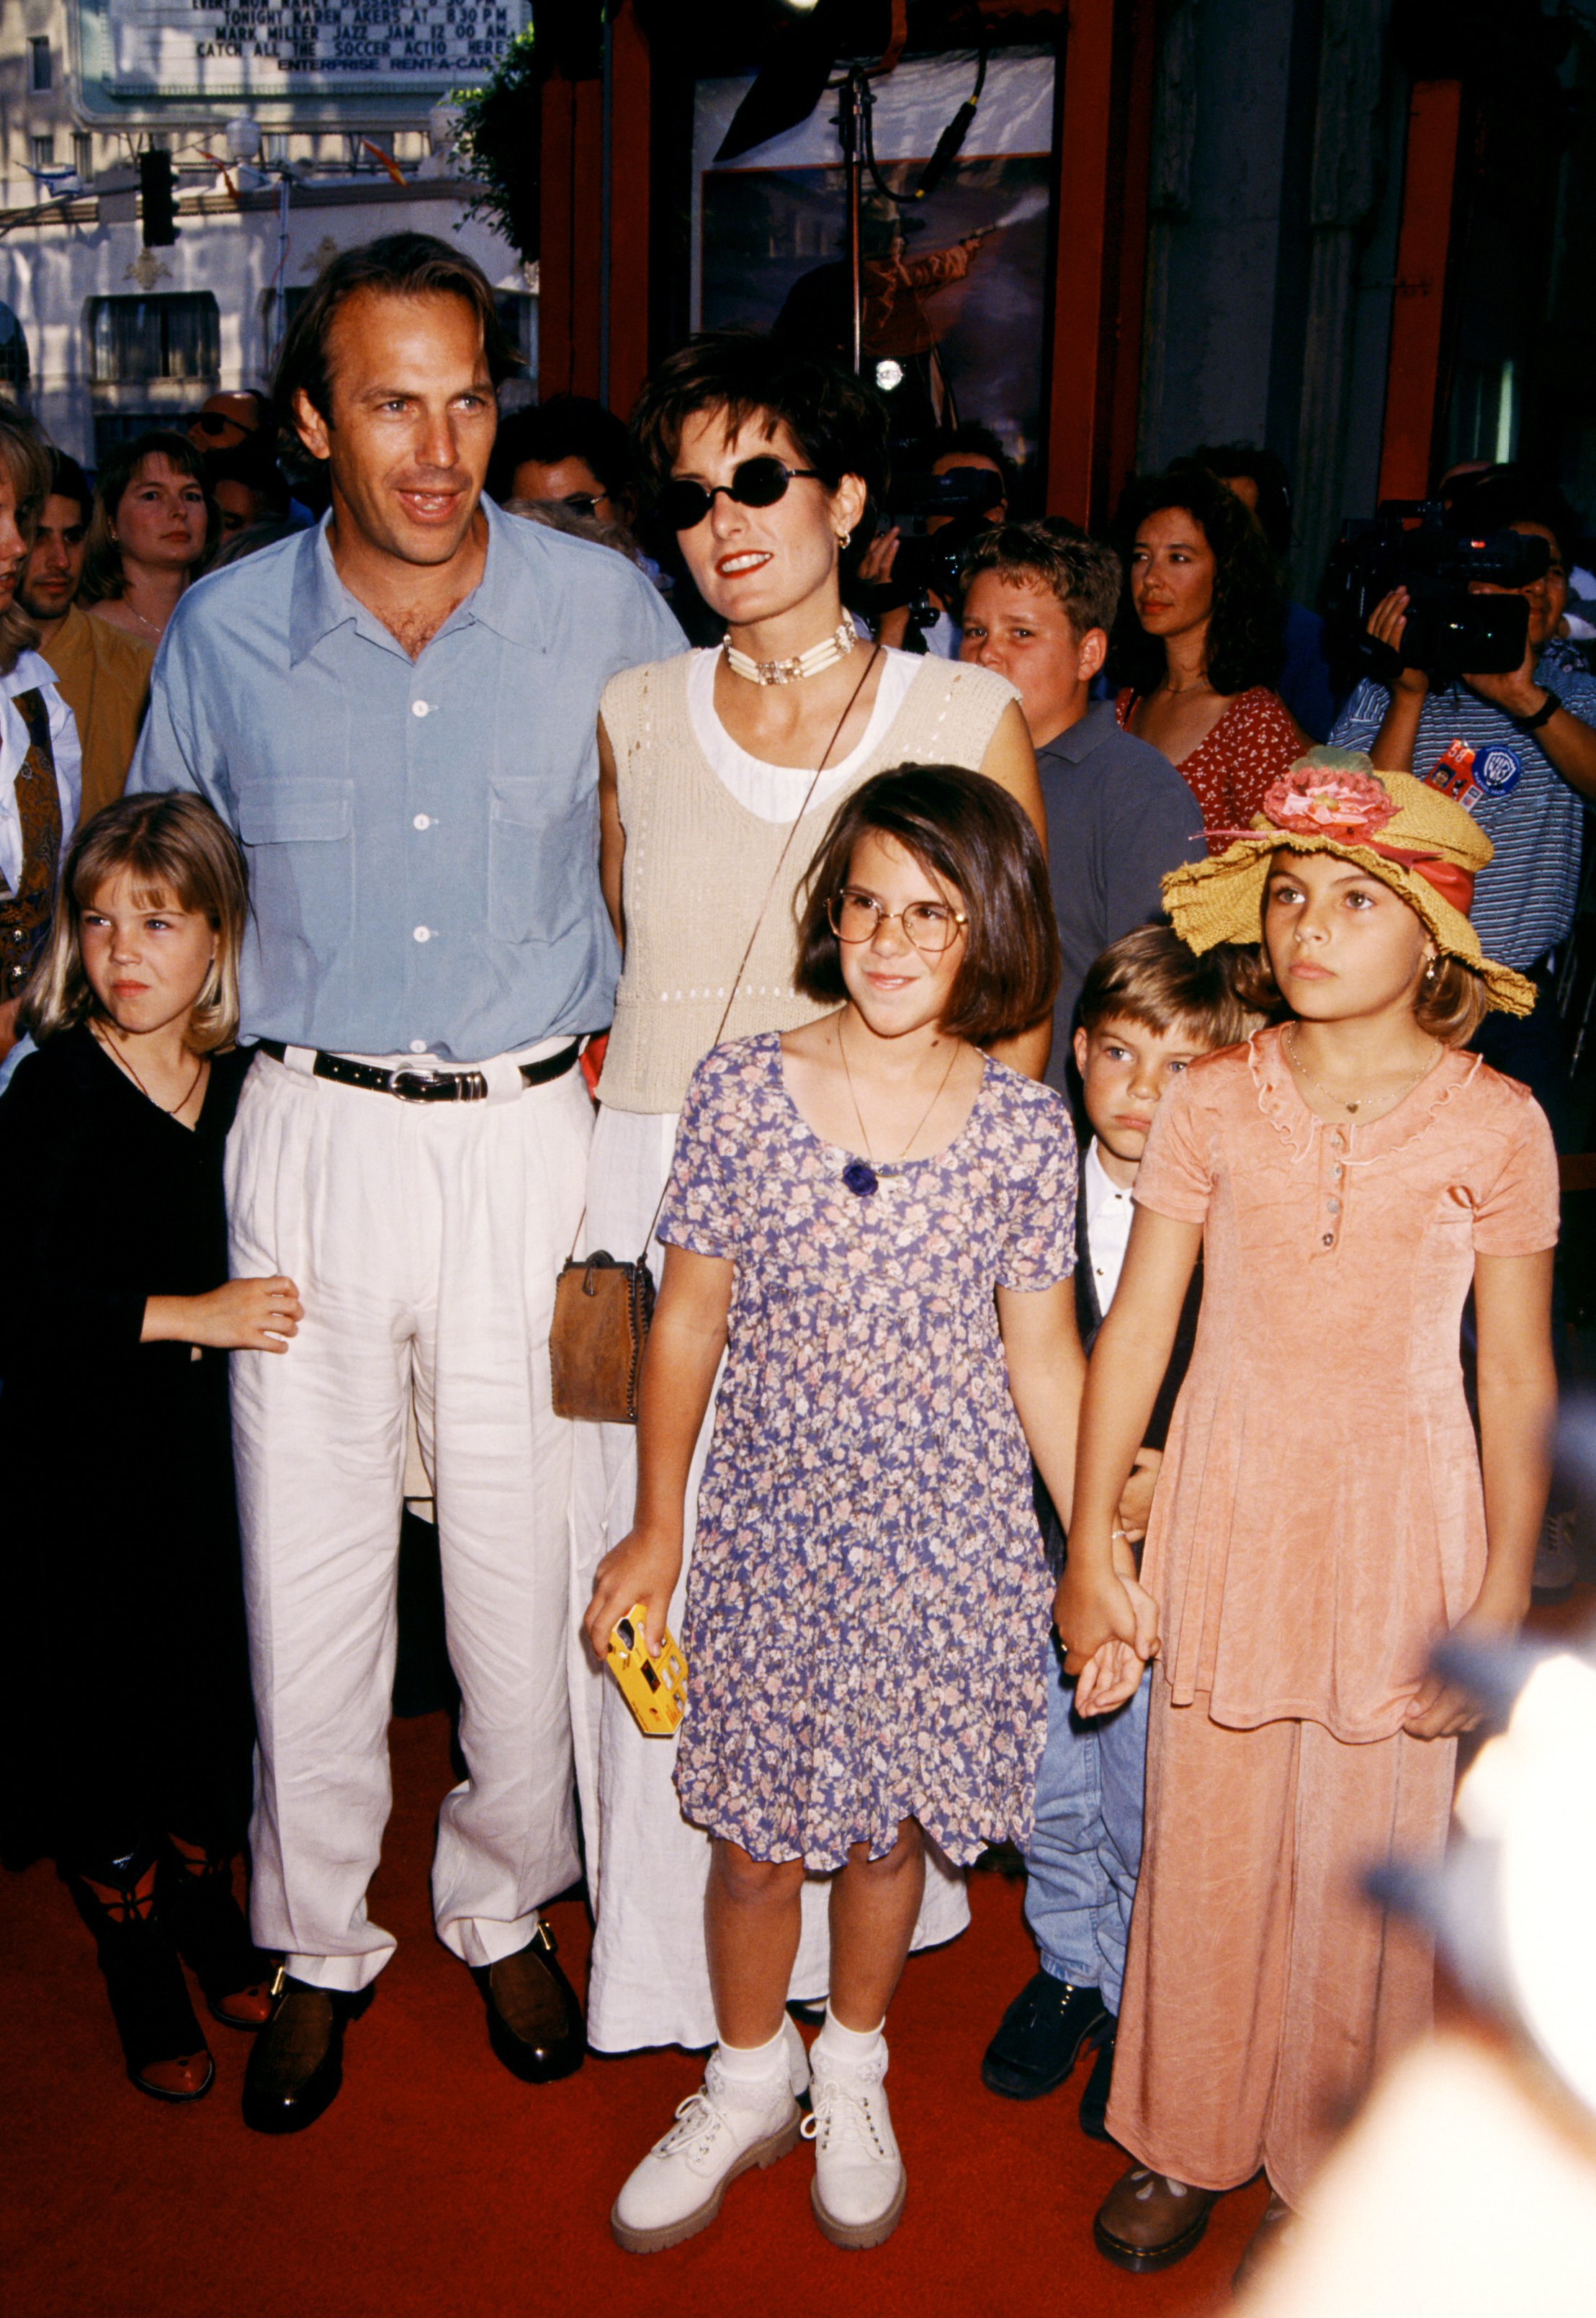 Actor Kevin Costner with his ex-wife and children Cindy Costner, Annie, Lily, and Joe at the "Wyatt Earp" Hollywood Premiere on June 18, 1994, in Hollywood, California. | Source: Getty Images